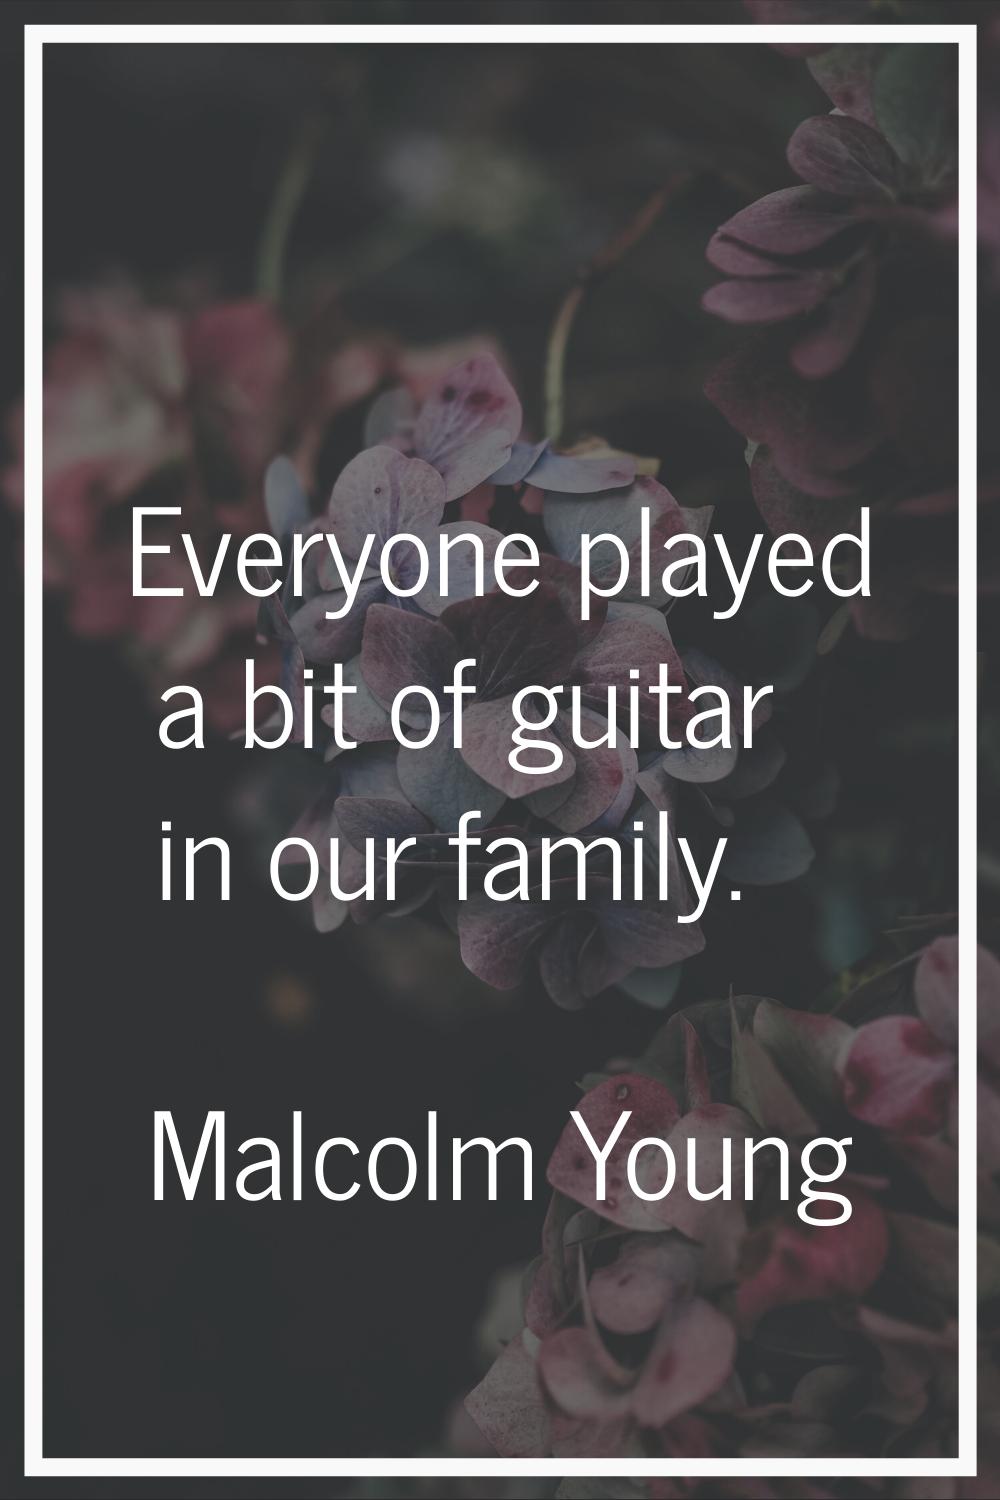 Everyone played a bit of guitar in our family.